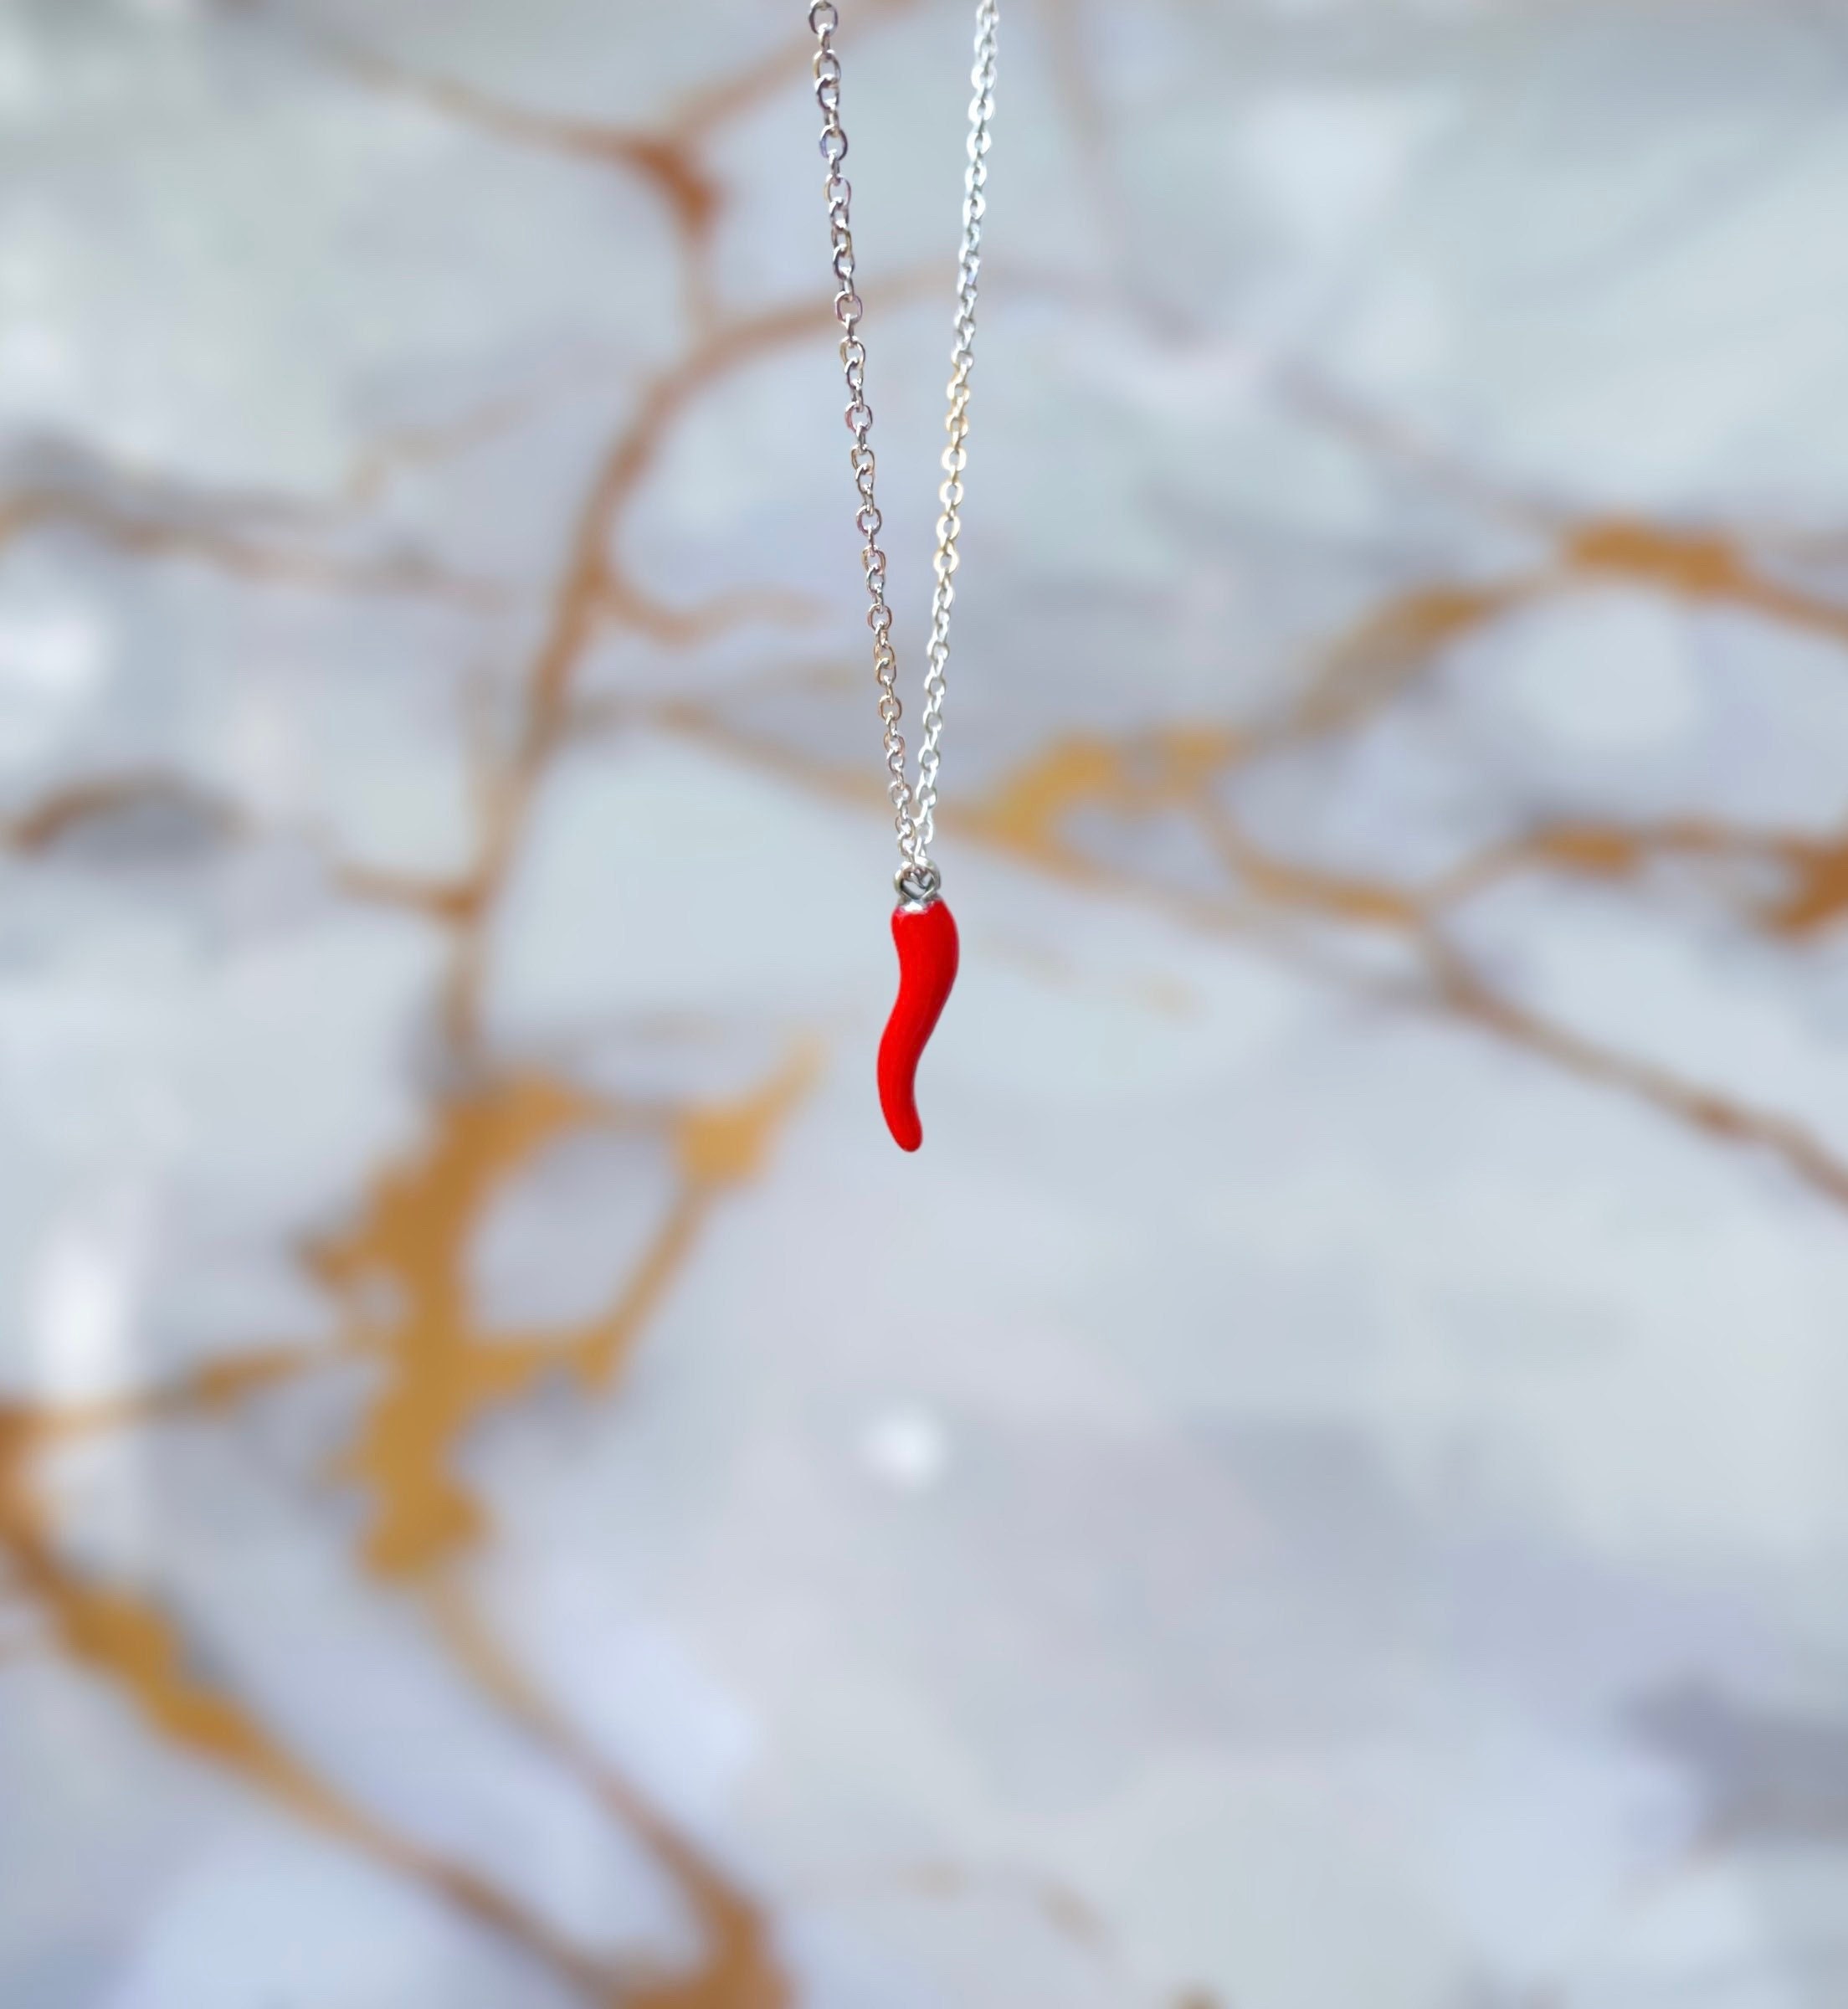 LED Chili Pepper Necklace with 9 Peppers (Each) – Mardi Gras Spot